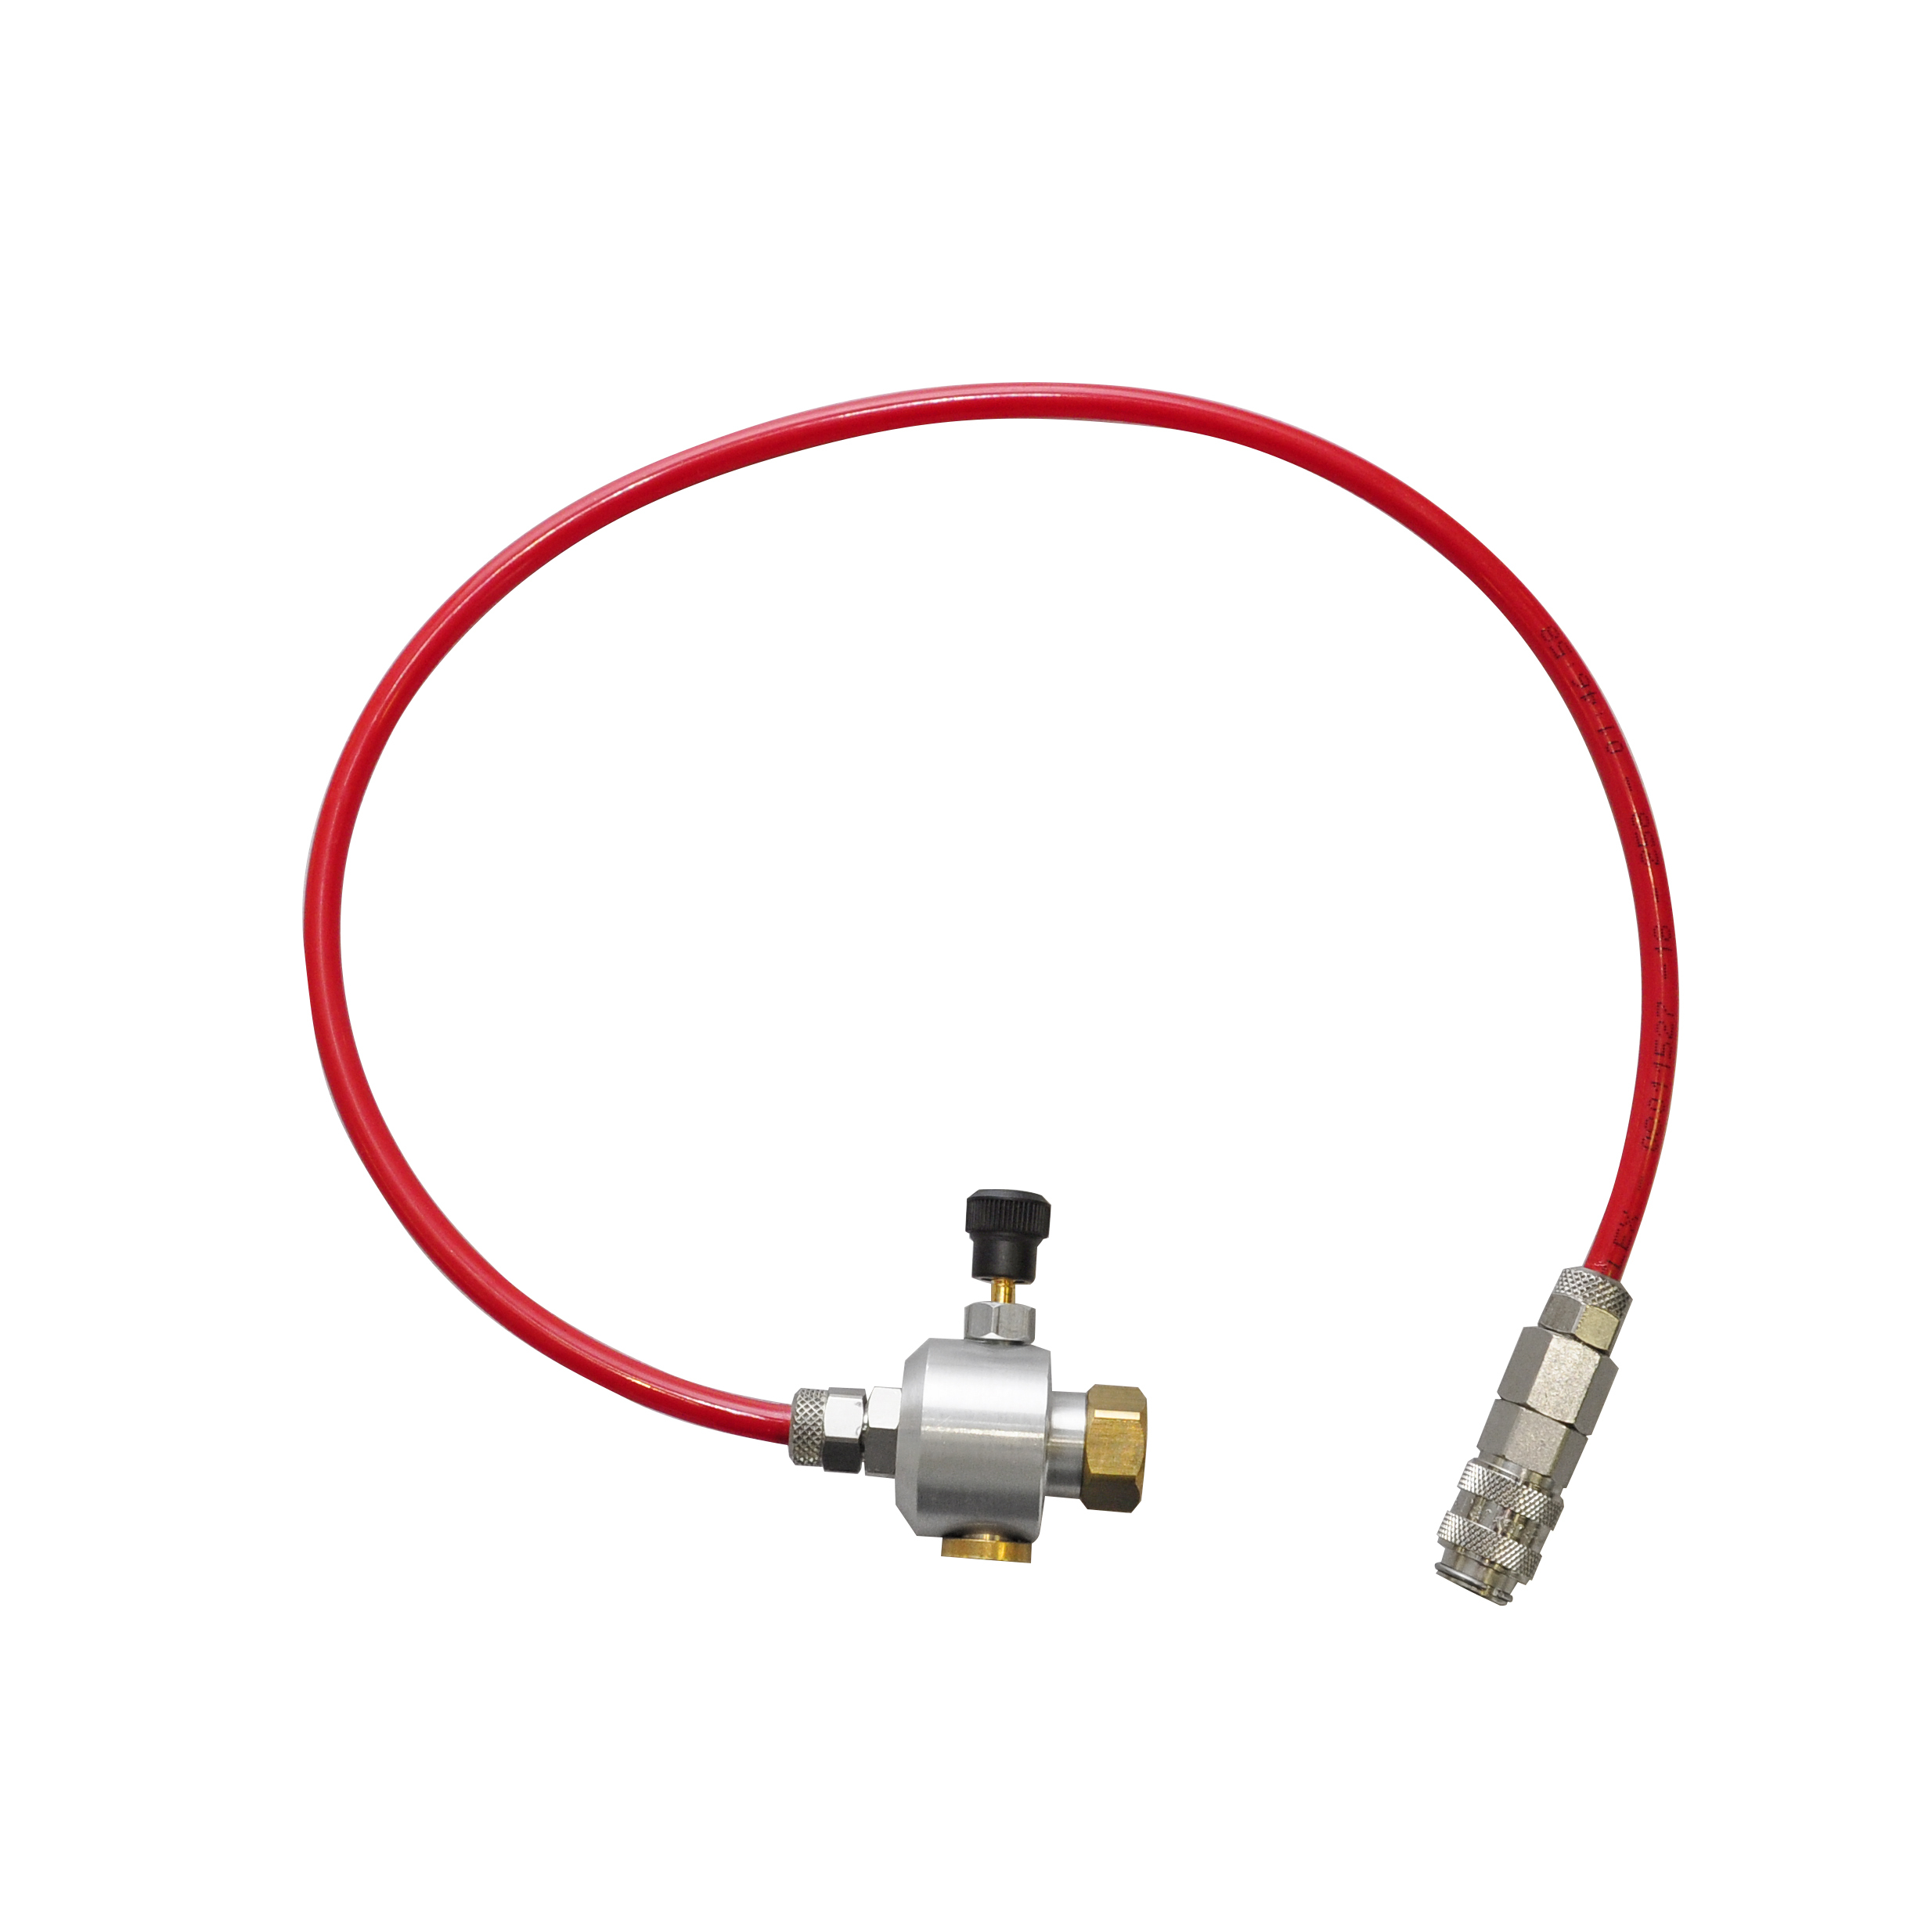 Regulating valve for pressurised gas cans with connection hose and 21 coupling